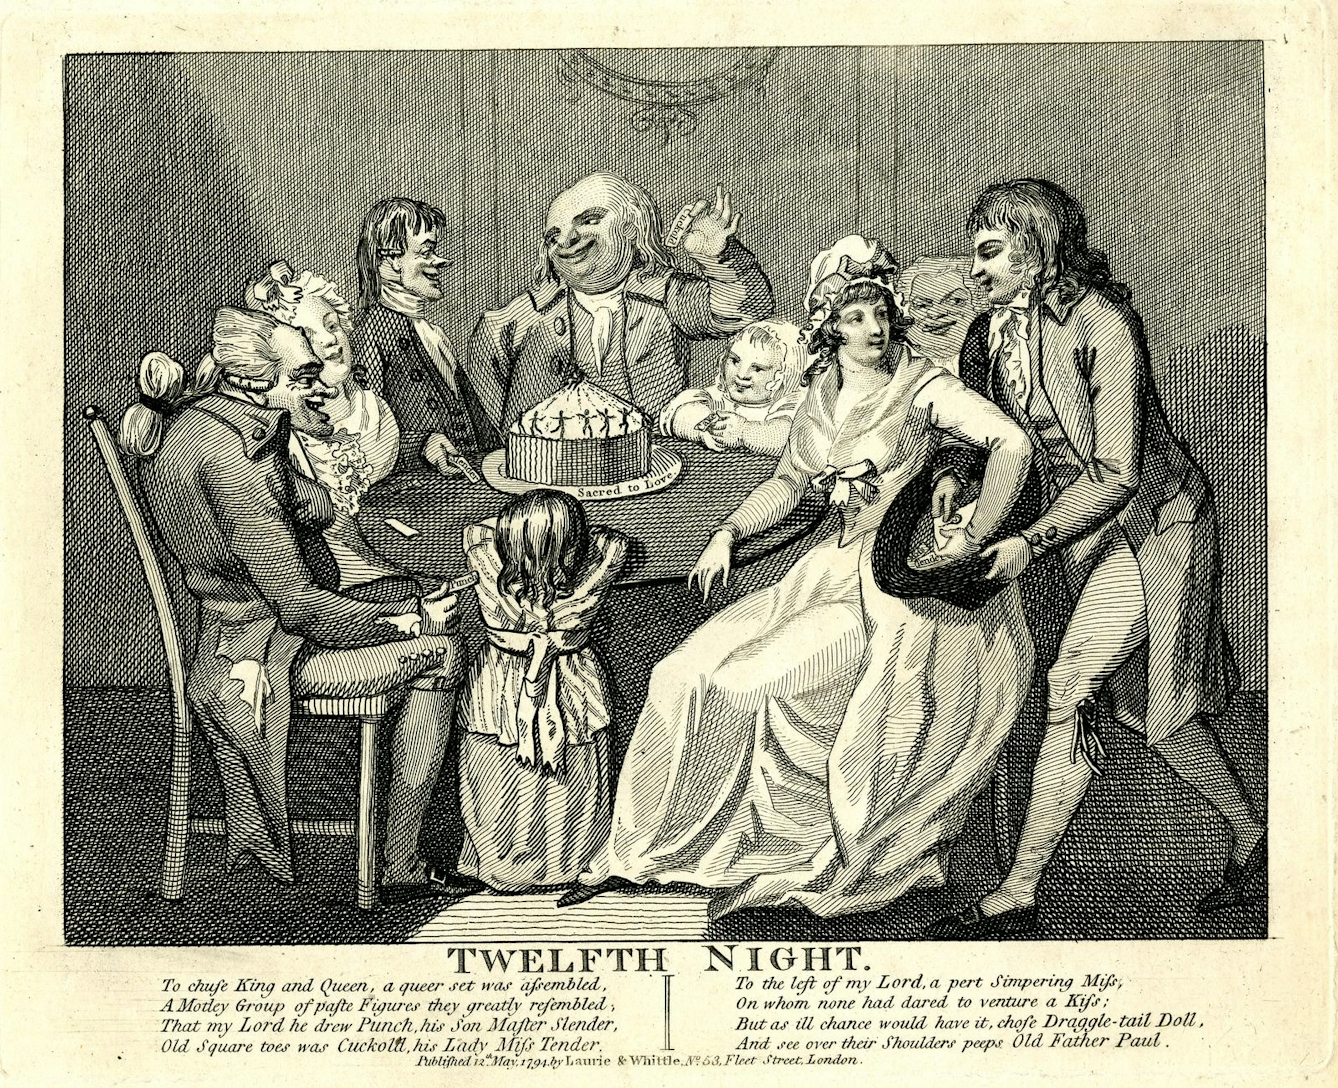 19th century etching showing a group gathered around a table for Twelfth Night. In the centre of the table is a large cake which is covered in icing showing figures dancing, the plate is engraved and text reads 'Sacred to love'. 

They have all drawn tickets apart from a young woman on the right, who a smiling young man holds out a hat with a ticker inscribed 'Miss Tender', while he slips a letter into her hand. A hunched elderly man, has drawn 'Punch'. 

There is text below the etching reading: 
'To chuse King and Queen, a queer set was assembled,
A Motley Group of paste Figures they greatly resembled,
That my Lord he drew Punch, his Son Master Slender
Old Square toes was Cuckold, his Lady Miss Tender.
To the left of my lord a pert Simpering Miss,
On whom none had dared to venture a Kiss;
But as ill chance would have it, chose Draggle-tail Doll,
And see over their Shoulders peeps Old Father Paul. 
12 May 1794'. 